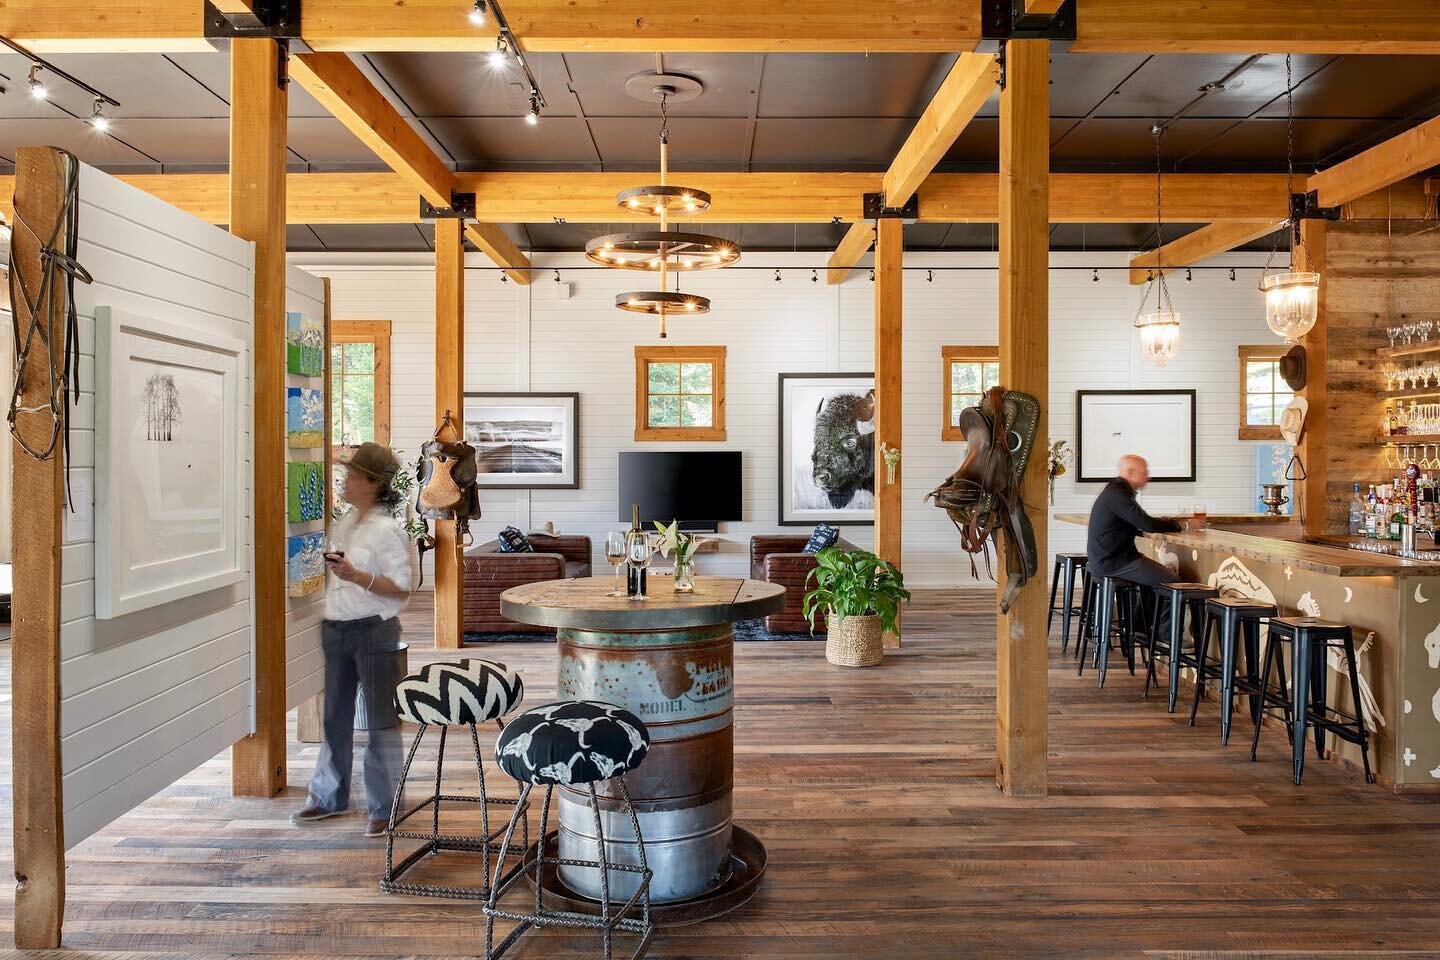 The barn renovation is complete! What&rsquo;s better than your own saloon/art gallery while vacationing in Big Sky, Montana? #vacationbigsky #bigsky #montanalife
Photo cred: @wkphotography 
.
.
. #vacationmode #partybarn #bigskymontana #vacationrenta